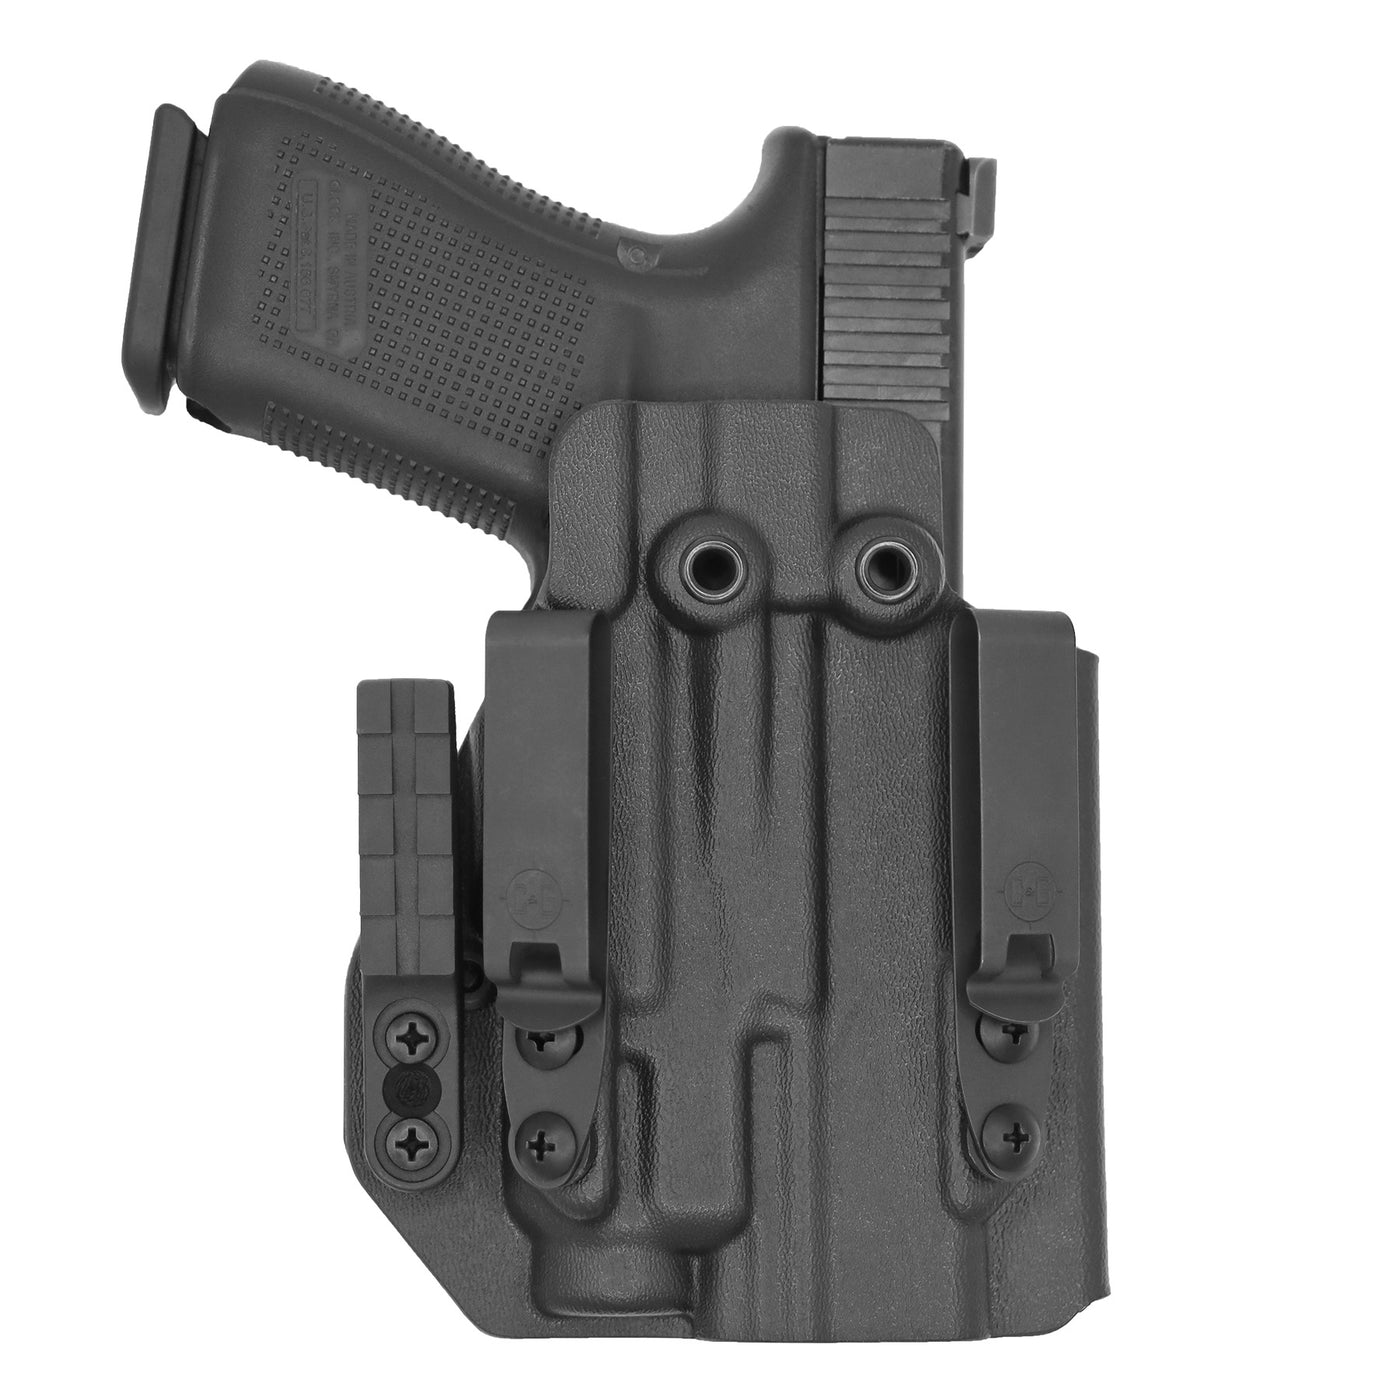 C&G Holsters Quickship IWB ALPHA UPGRADE Tactical Glock 20/21 Streamlight TLR7/a in holstered position